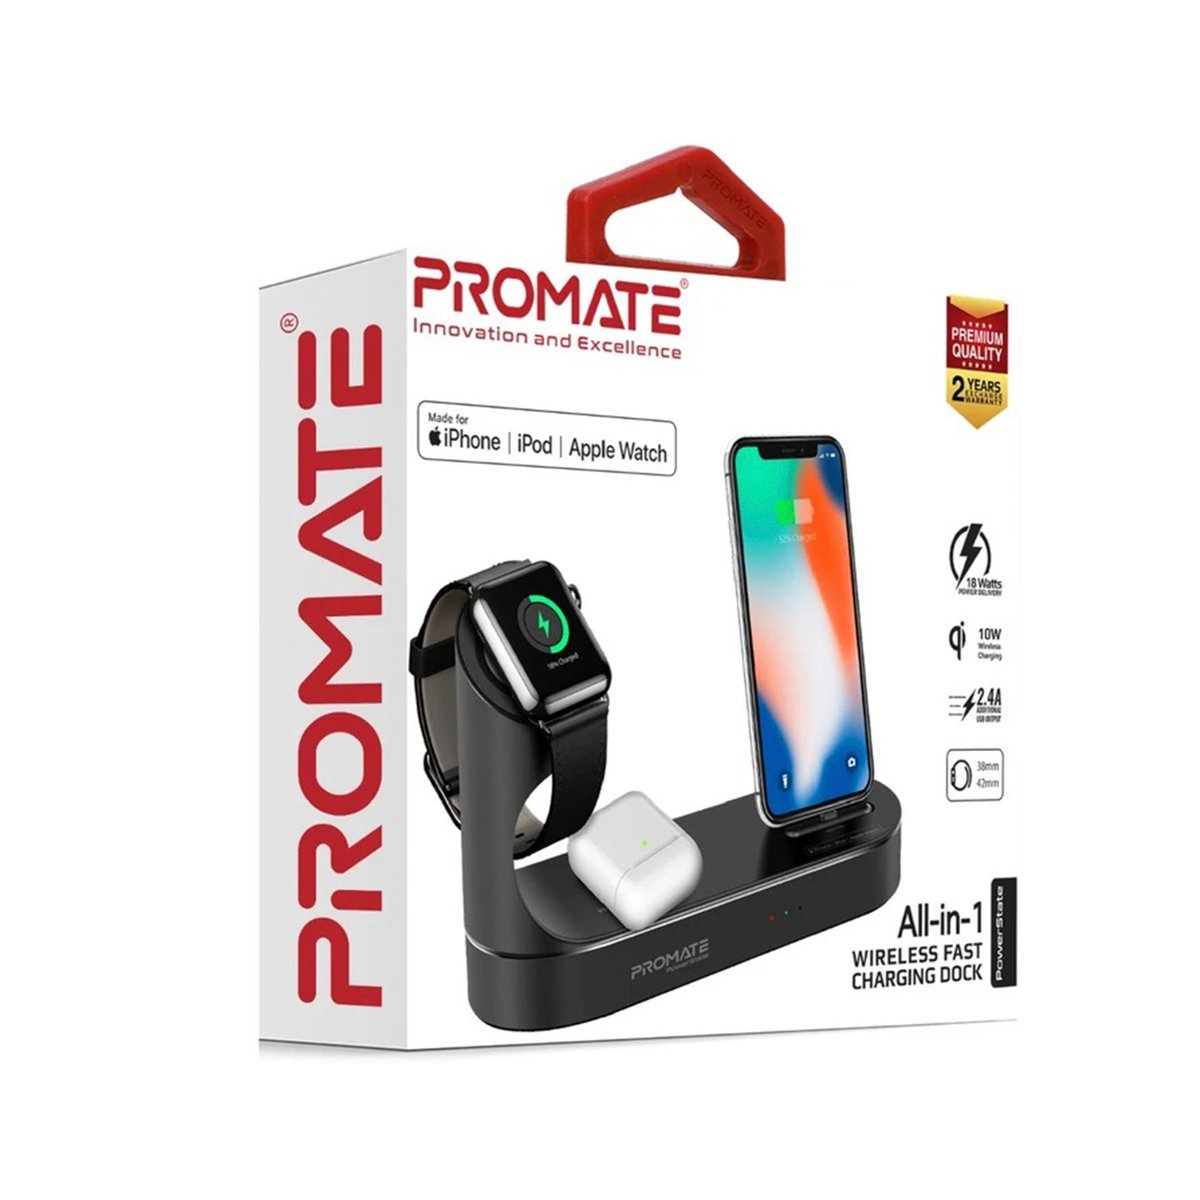 Promate All-in-1 Wireless Charging Dock for Apple Devices POWERSTATE